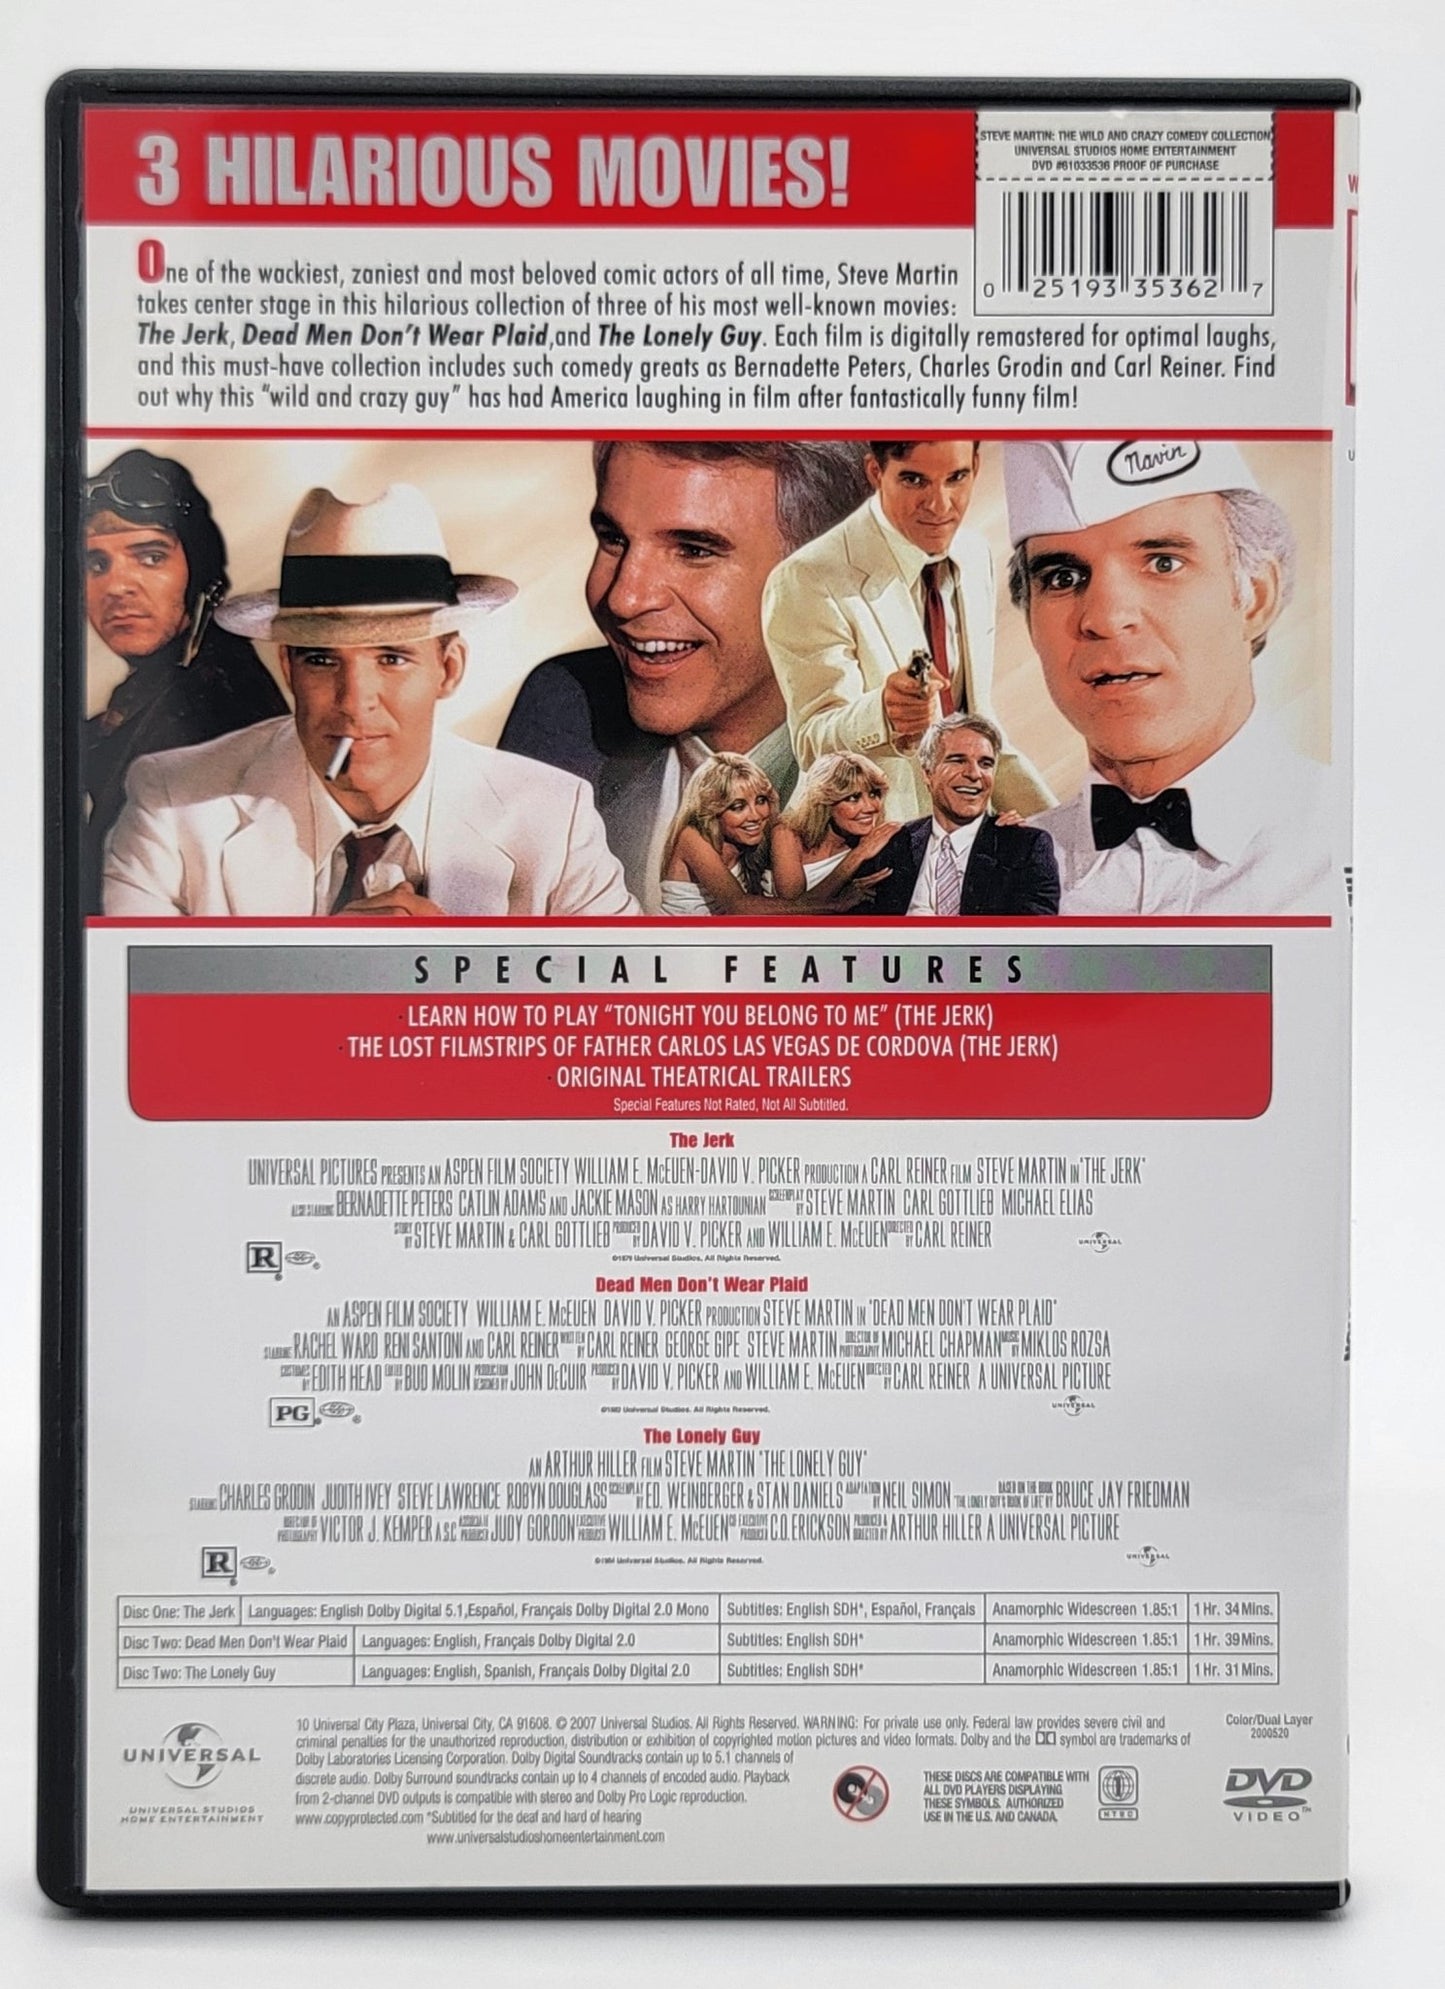 Universal Studios Home Entertainment - The Wild and Crazy Comedy Collection - Steve Martin | DVD | The Franchise Collection - 2 Disc Set - DVD - Steady Bunny Shop